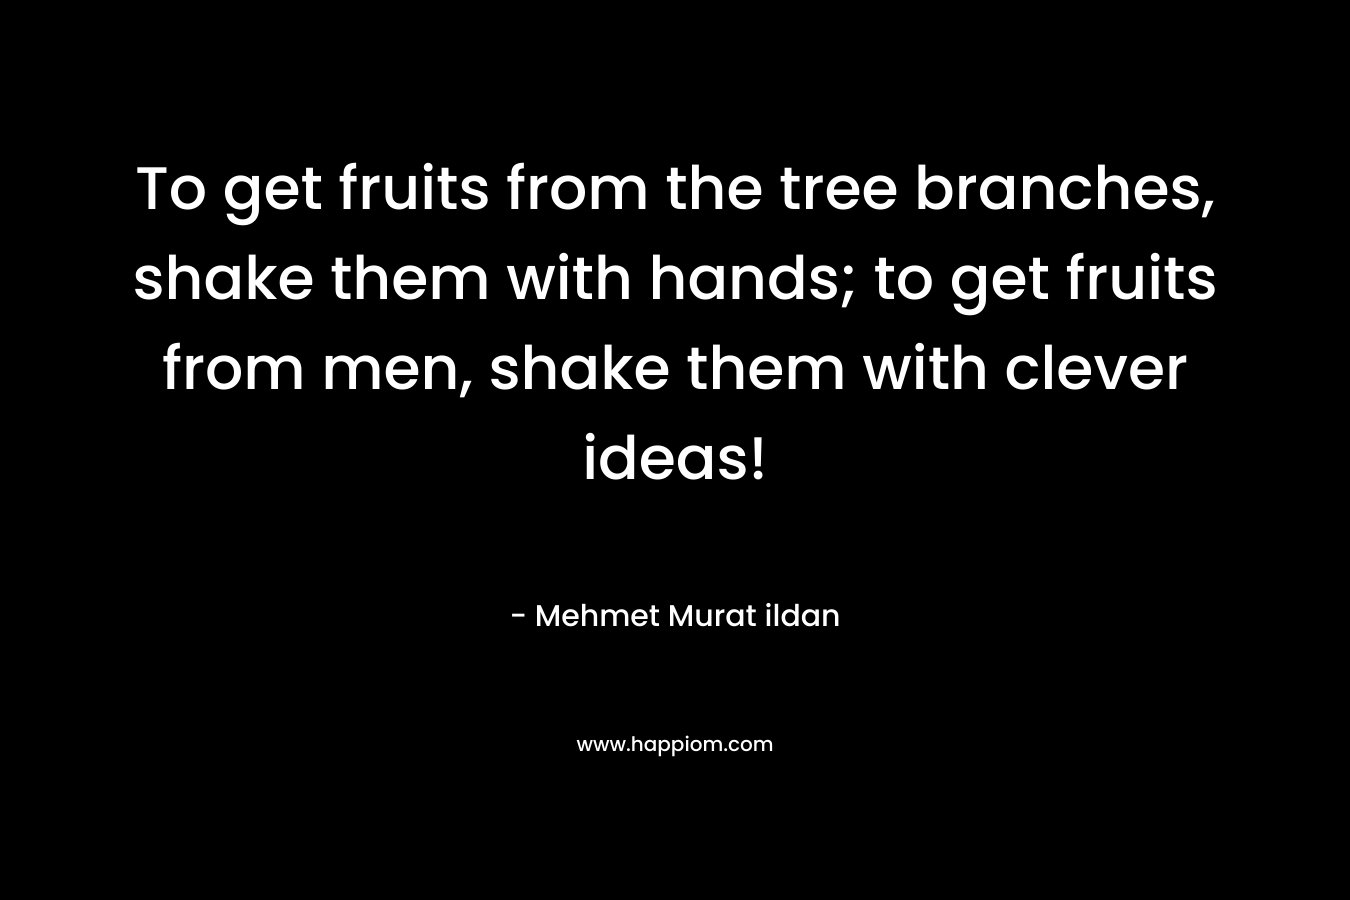 To get fruits from the tree branches, shake them with hands; to get fruits from men, shake them with clever ideas!